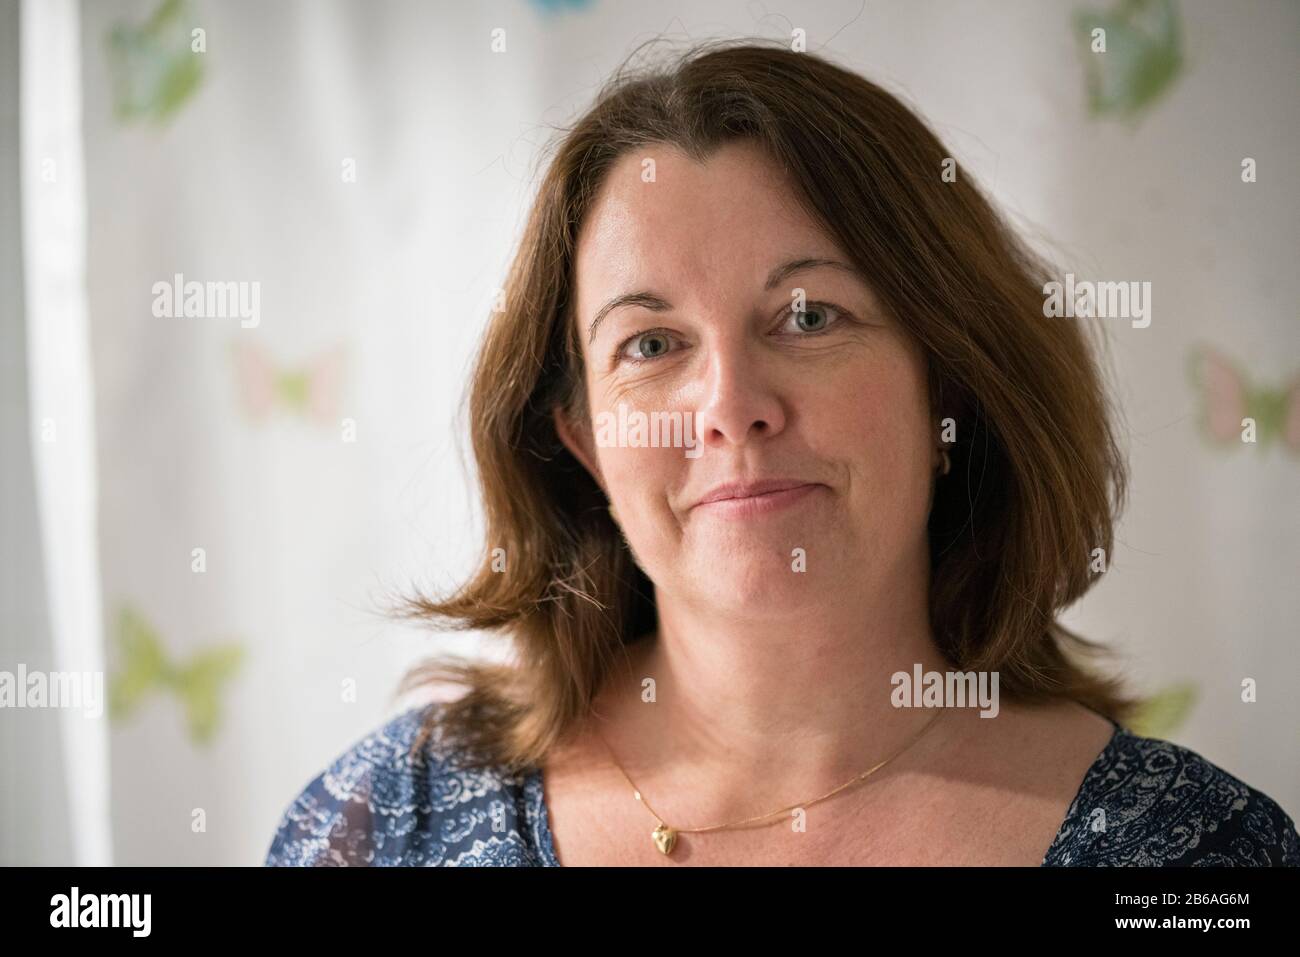 Close up portrait of a 50 year old woman with brown hair. Stock Photo